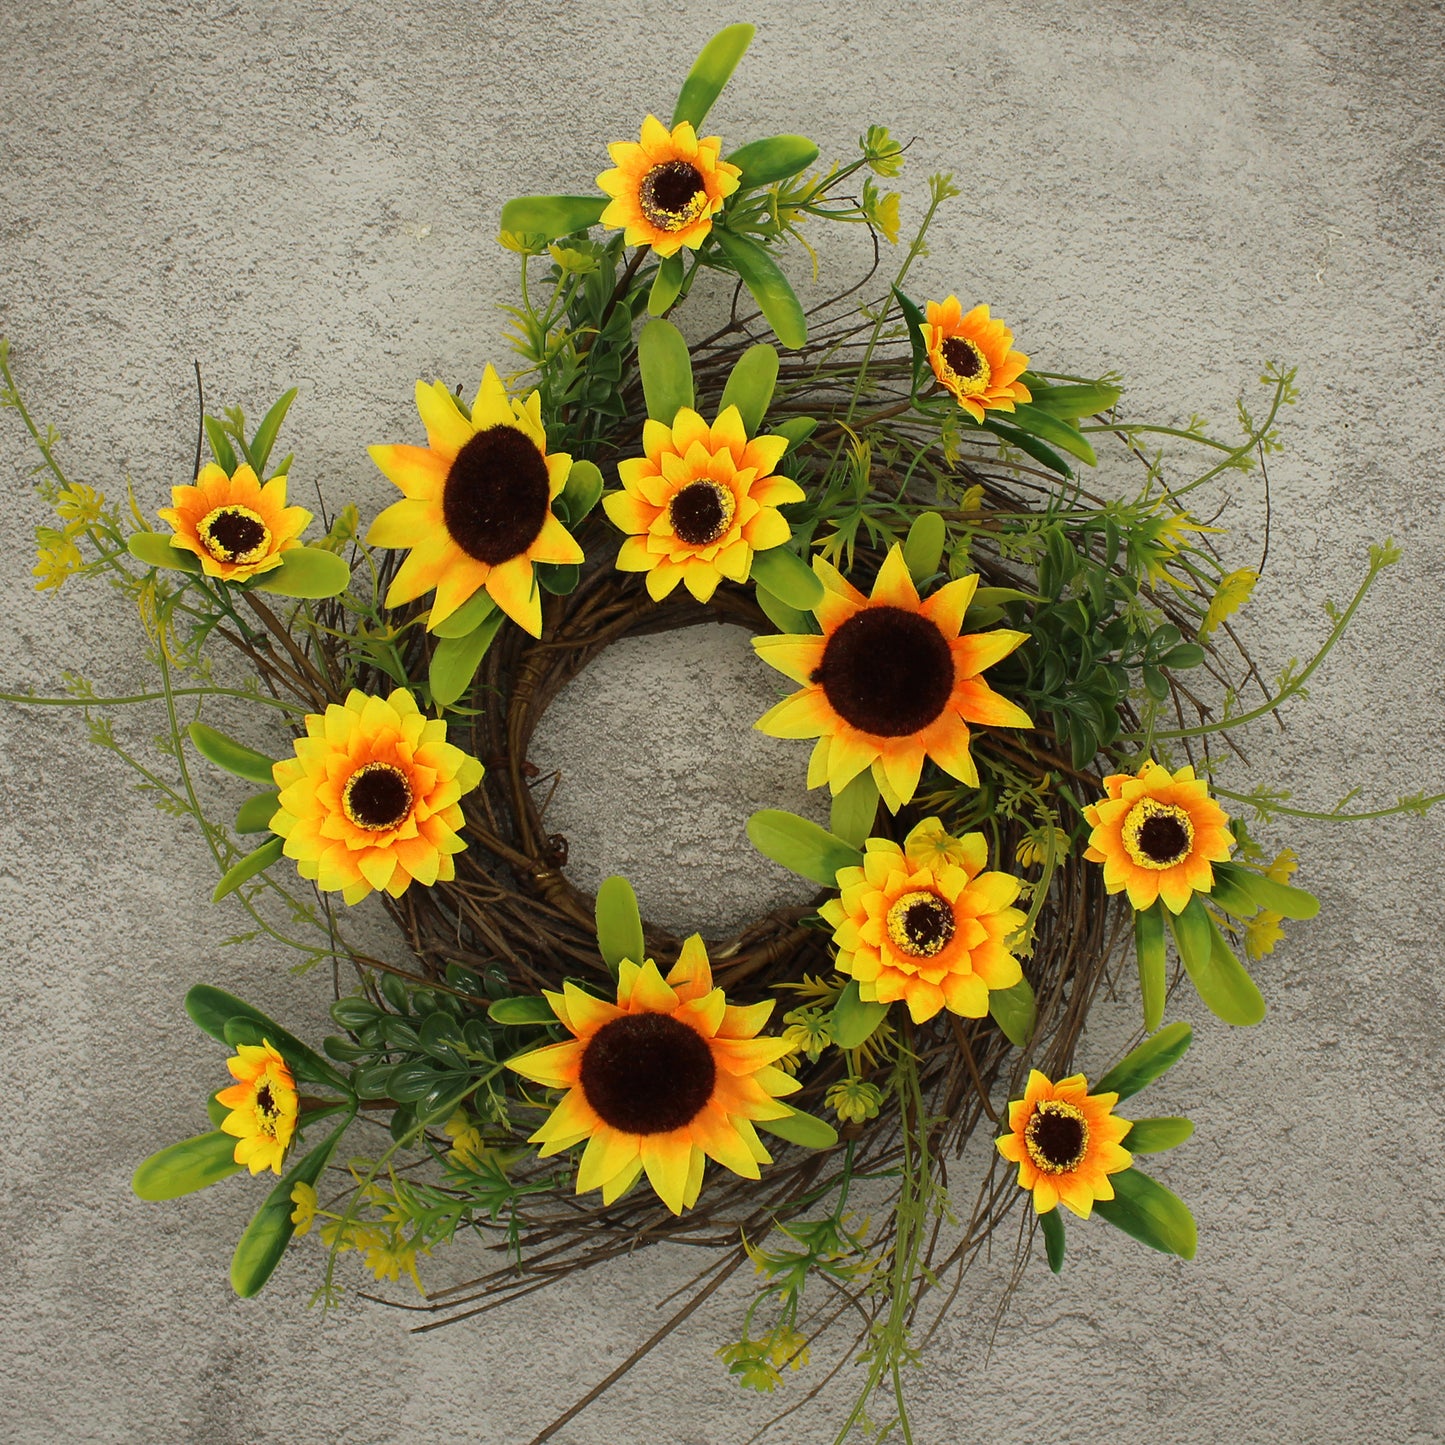 CVHOMEDECO. Rustic Country Artificial Sunflower and Twig Wreath, Year Round Full Green Wreath for Indoor or Outdoor Display, 12 Inch